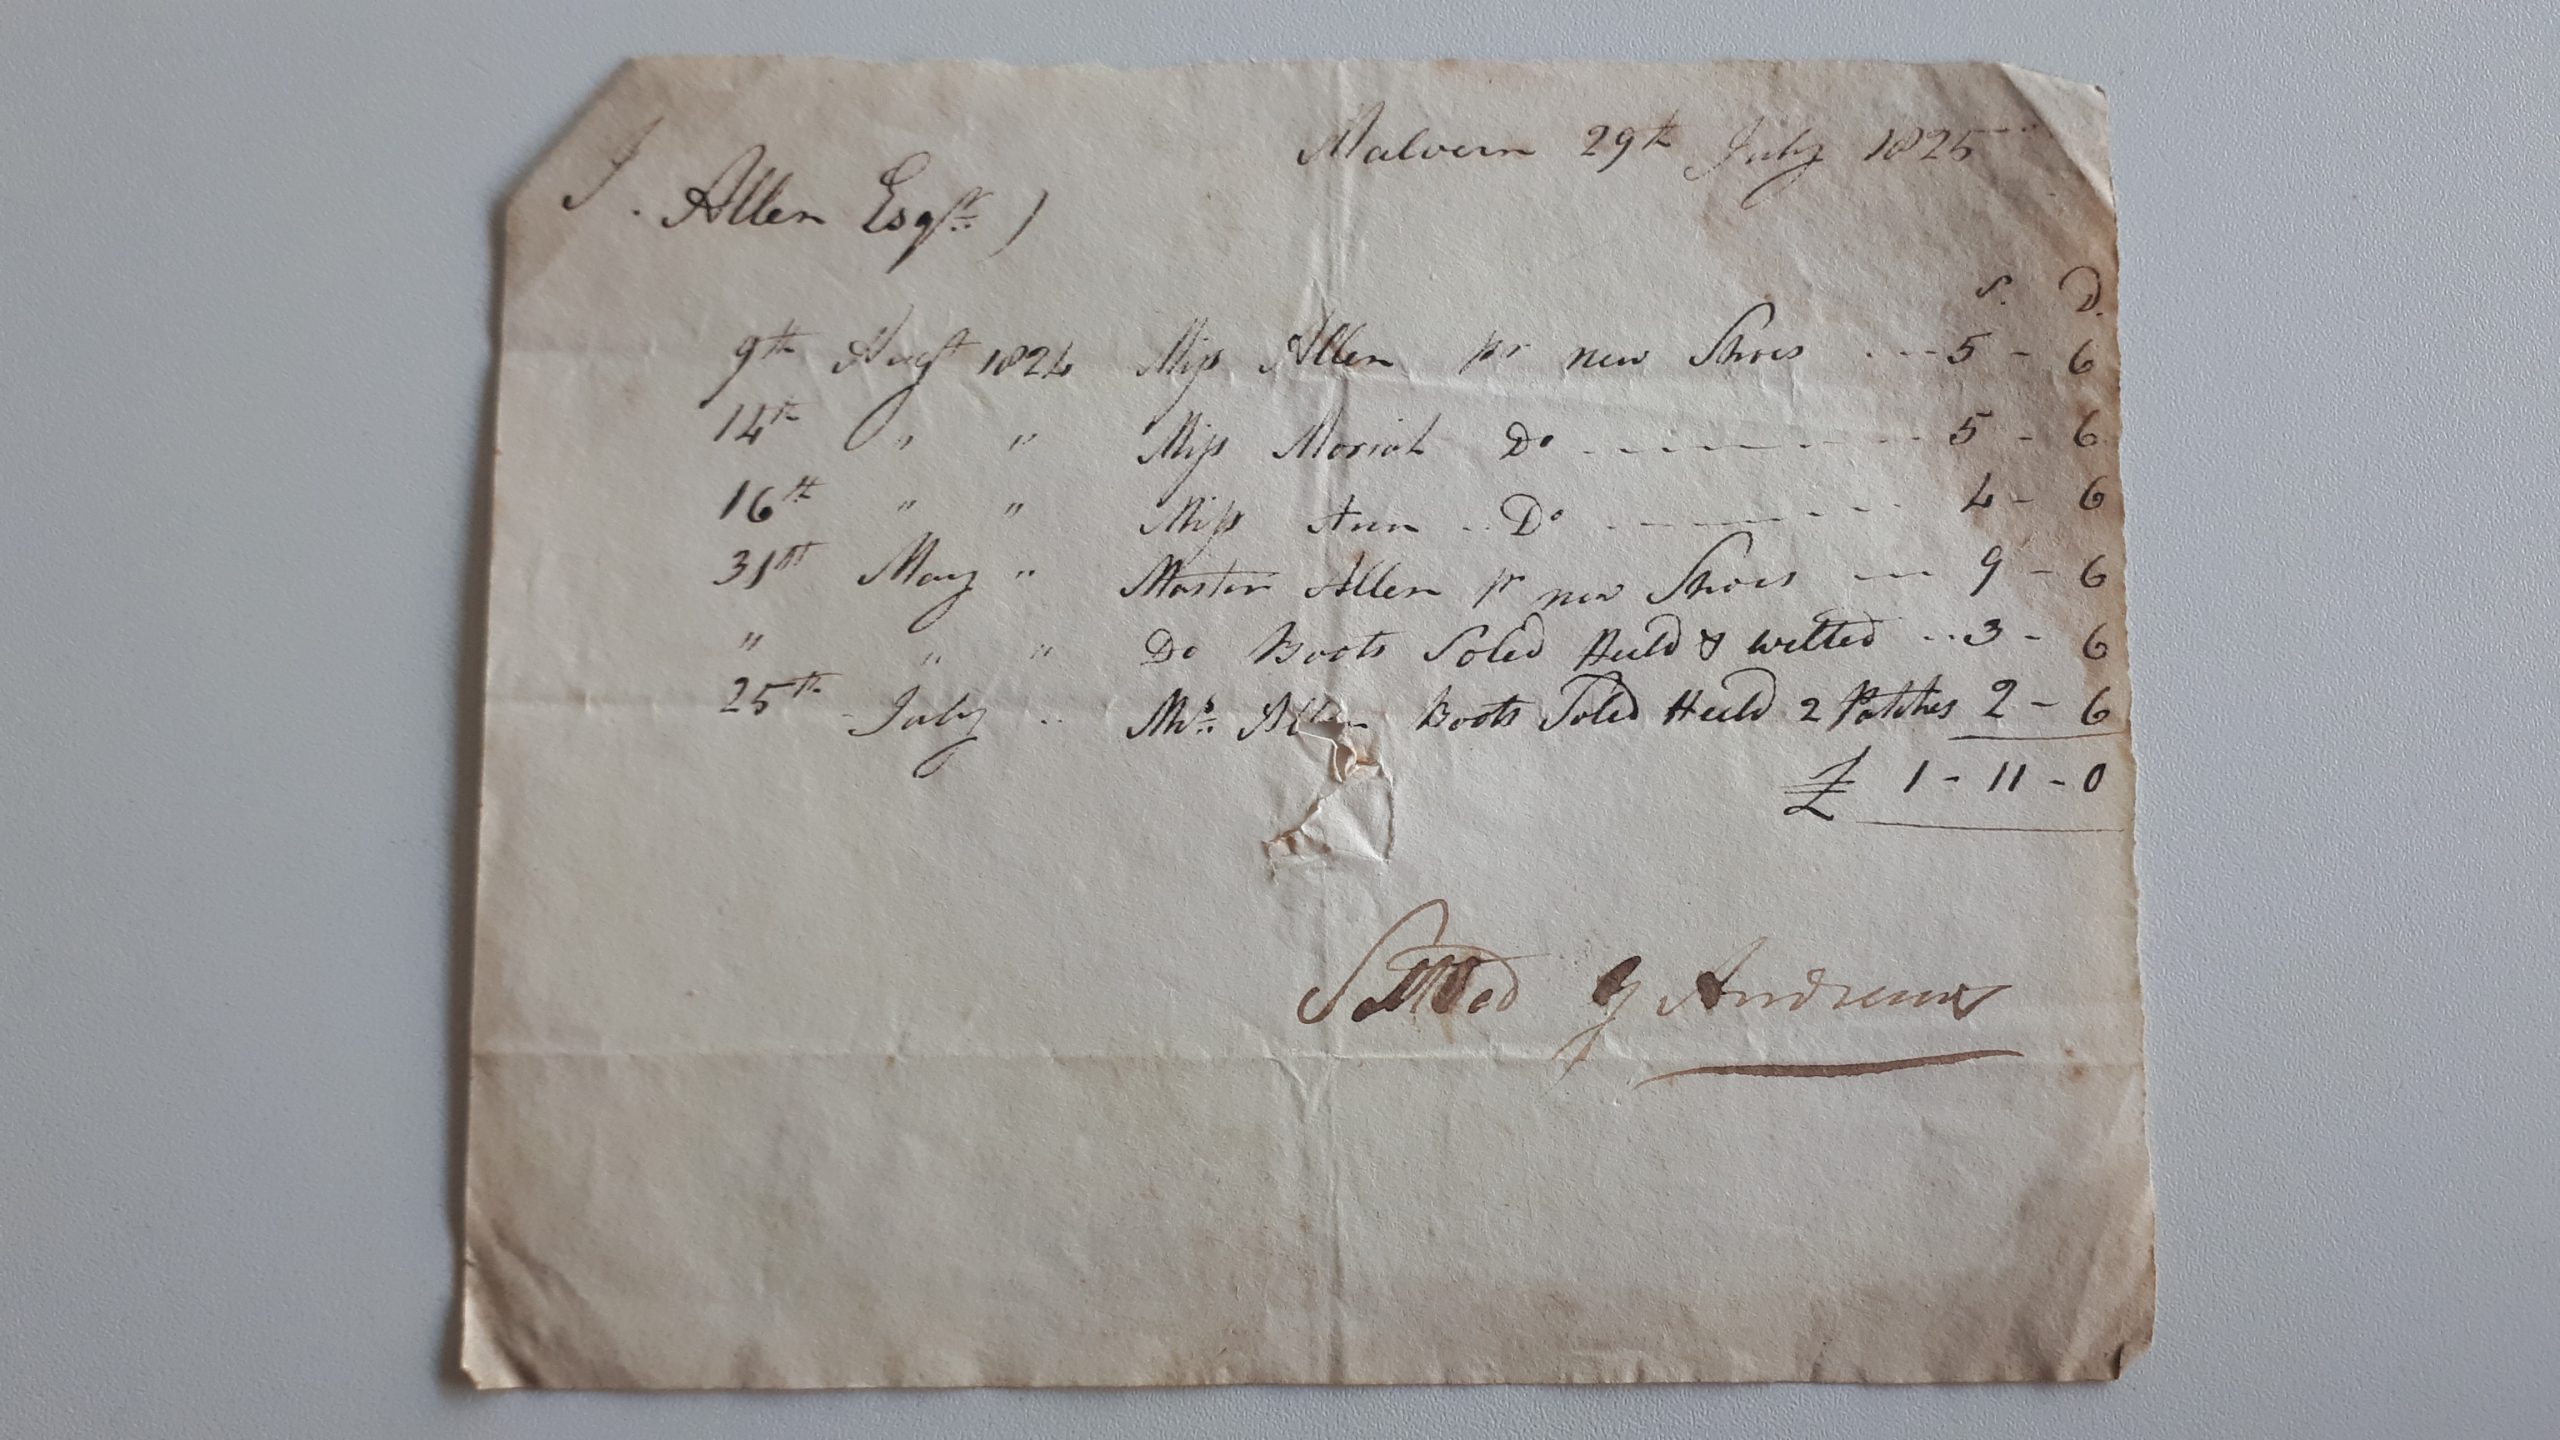 J. H. Allen Esq. Expenses for new shoes Malvern 29th July 1825 Ref 899.975 9276.(i) 4 © WAAS